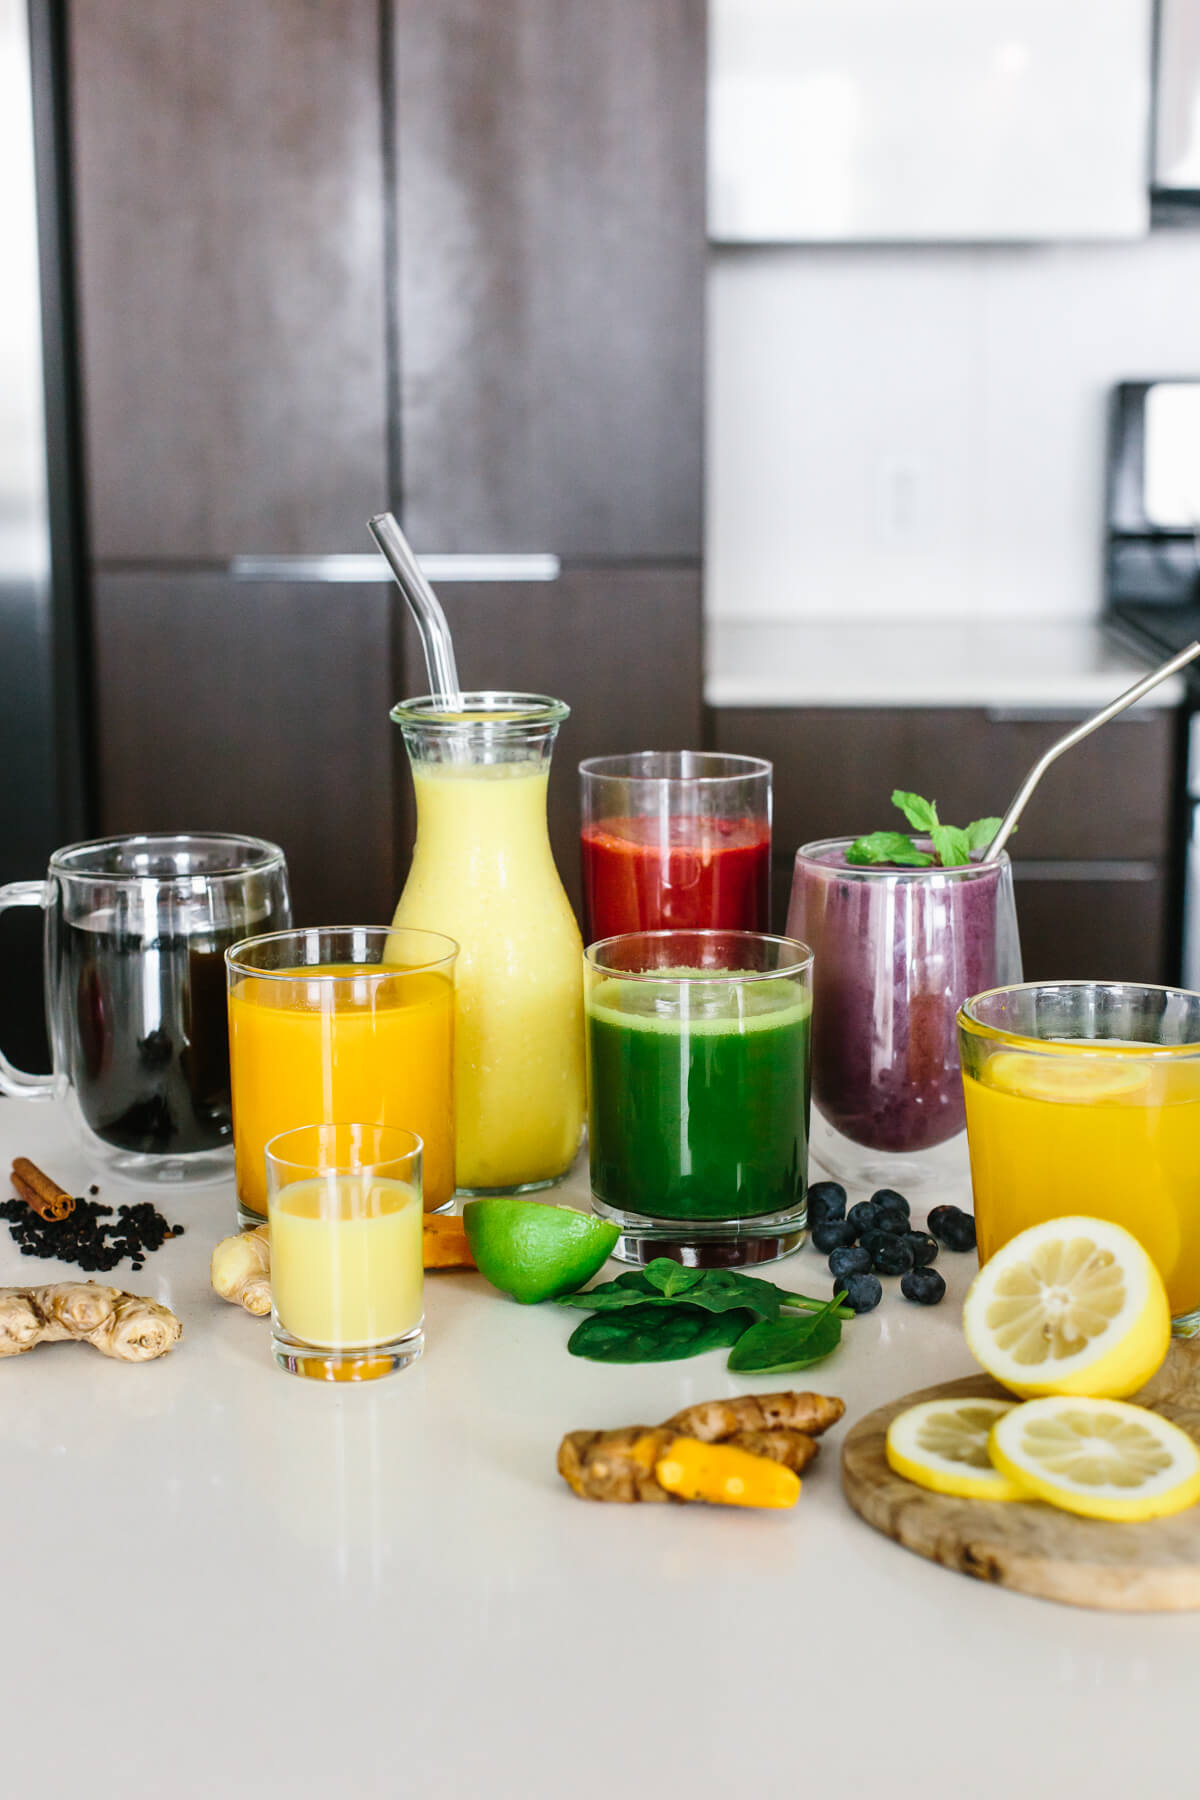 Anti-inflammatory drinks laid out on a countertop.